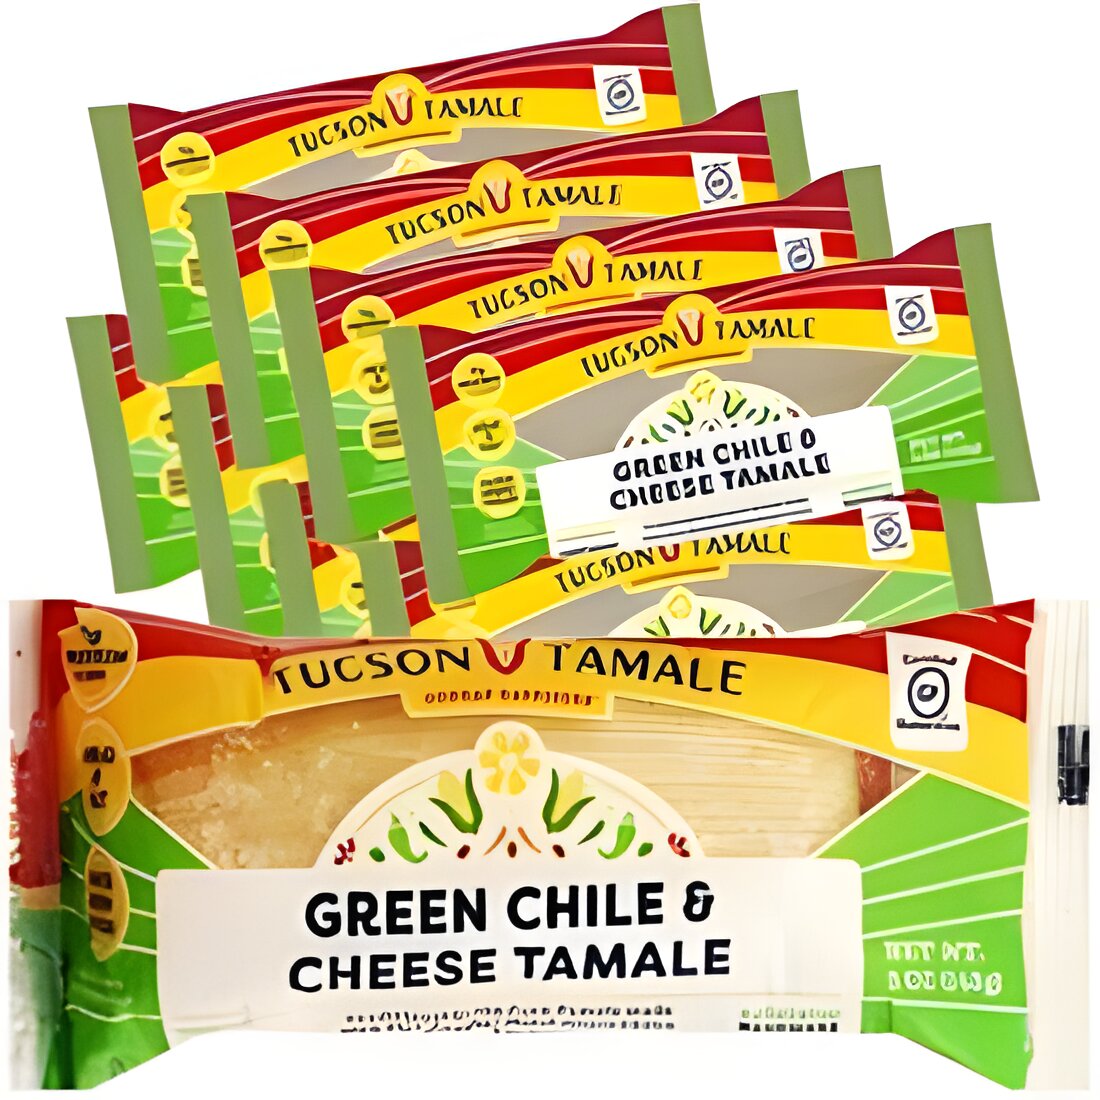 Free Tucson Tamale Green Chile & Cheese Tamale